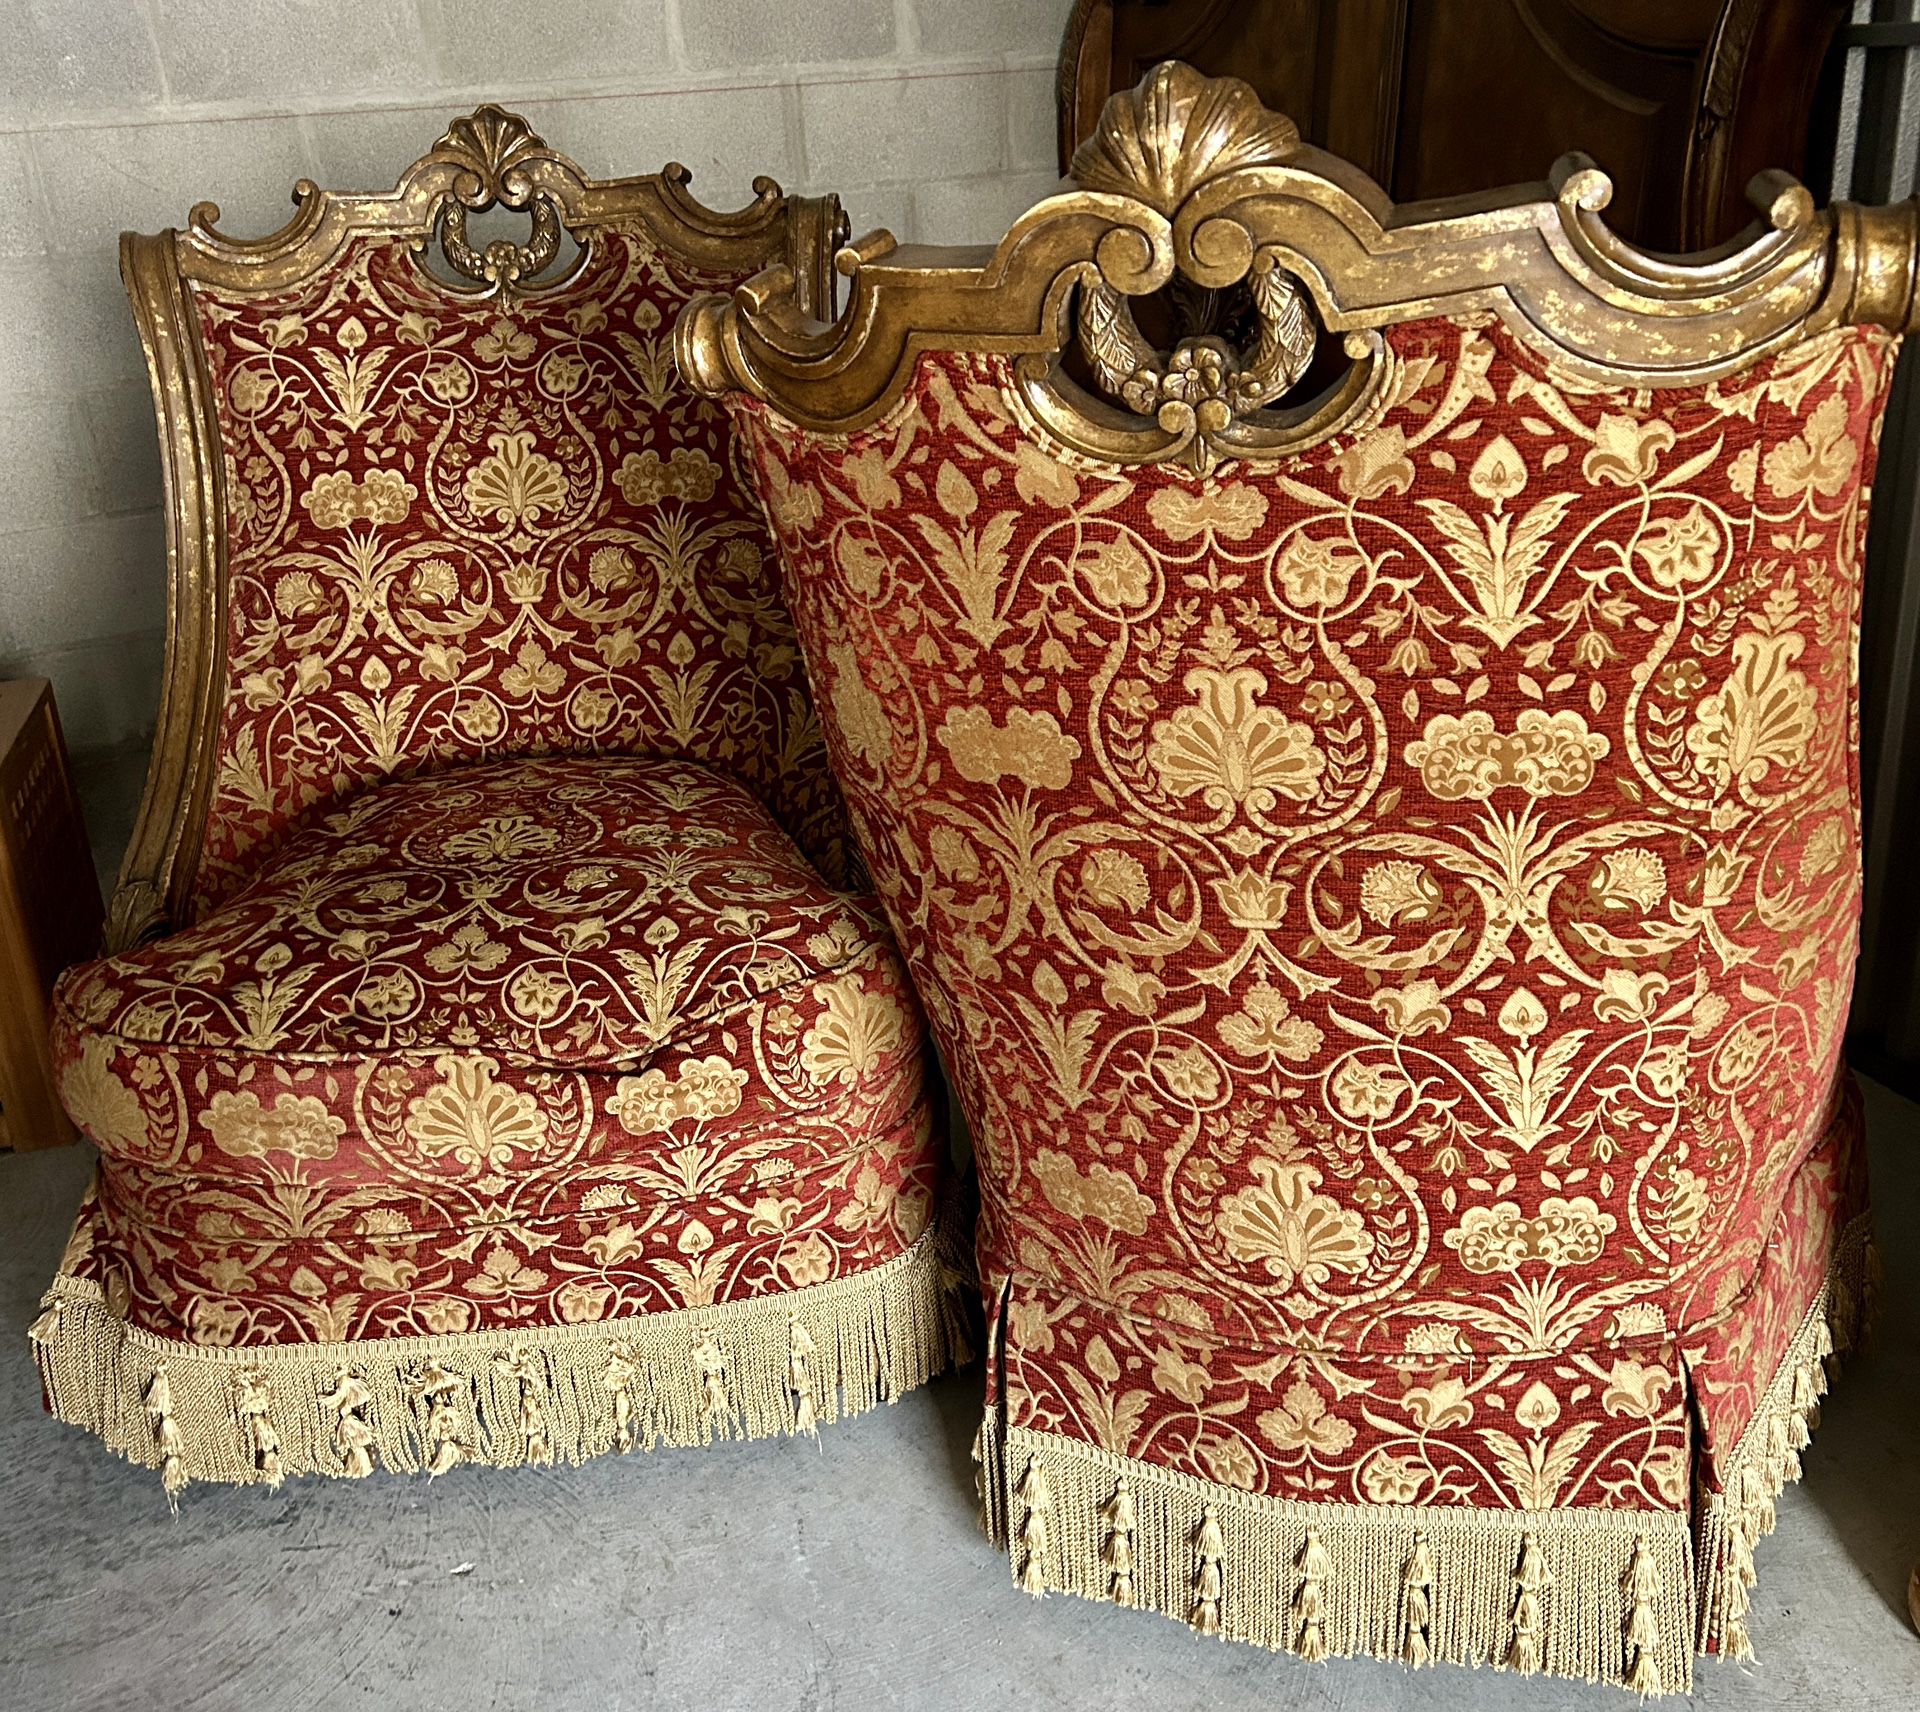 Oversized Antique Gold Gilt Chair Red & Gold Fabric Gold Fringed Skirt Fit For A King/Queen